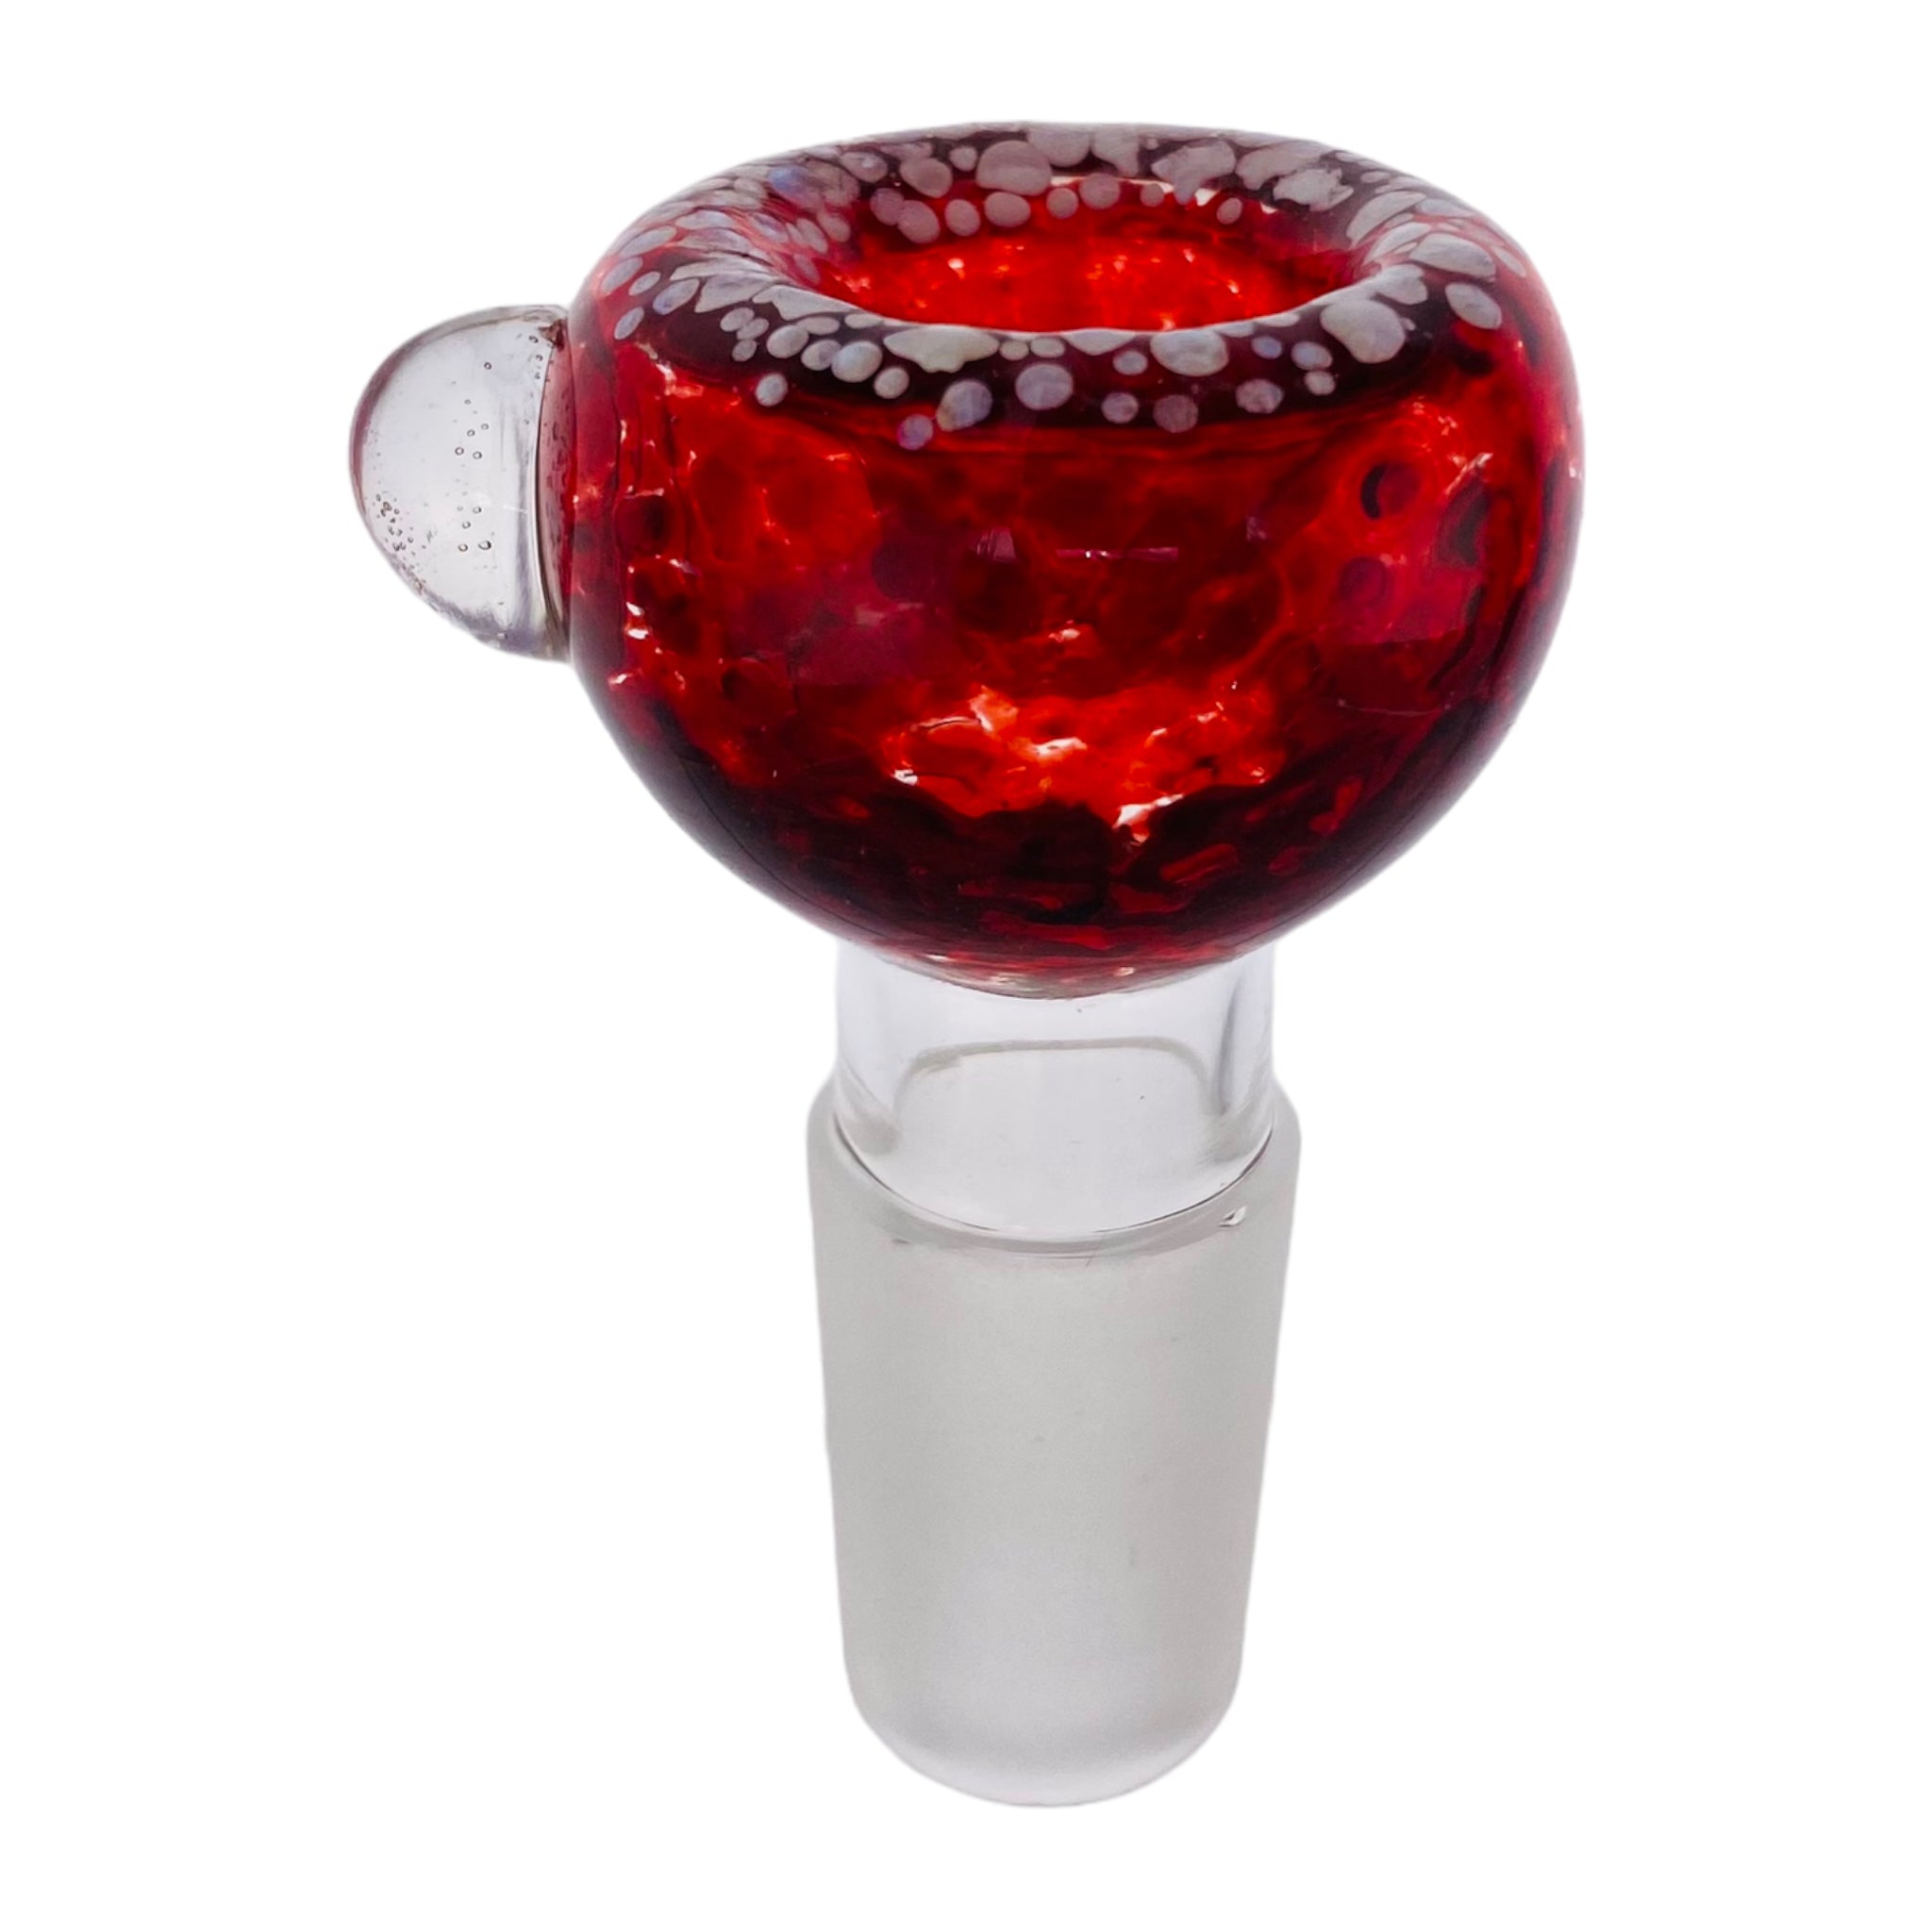 18mm Flower Bowl - Bubble With Frosted Rim Bong Bowl Piece - Red